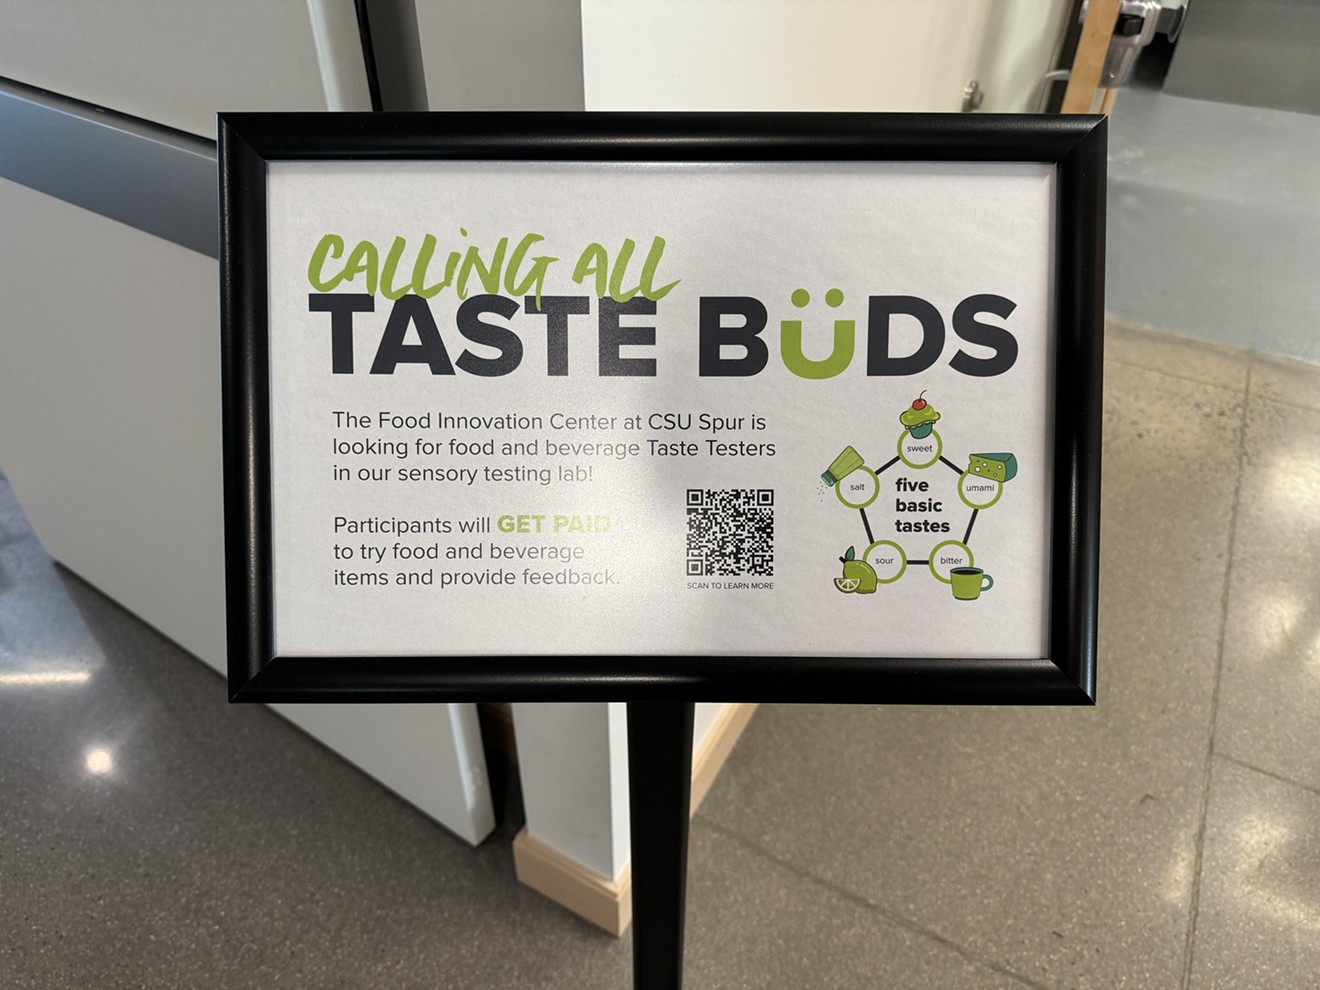 The " calling all taste buds" signs posted around the CSU Spur campus.